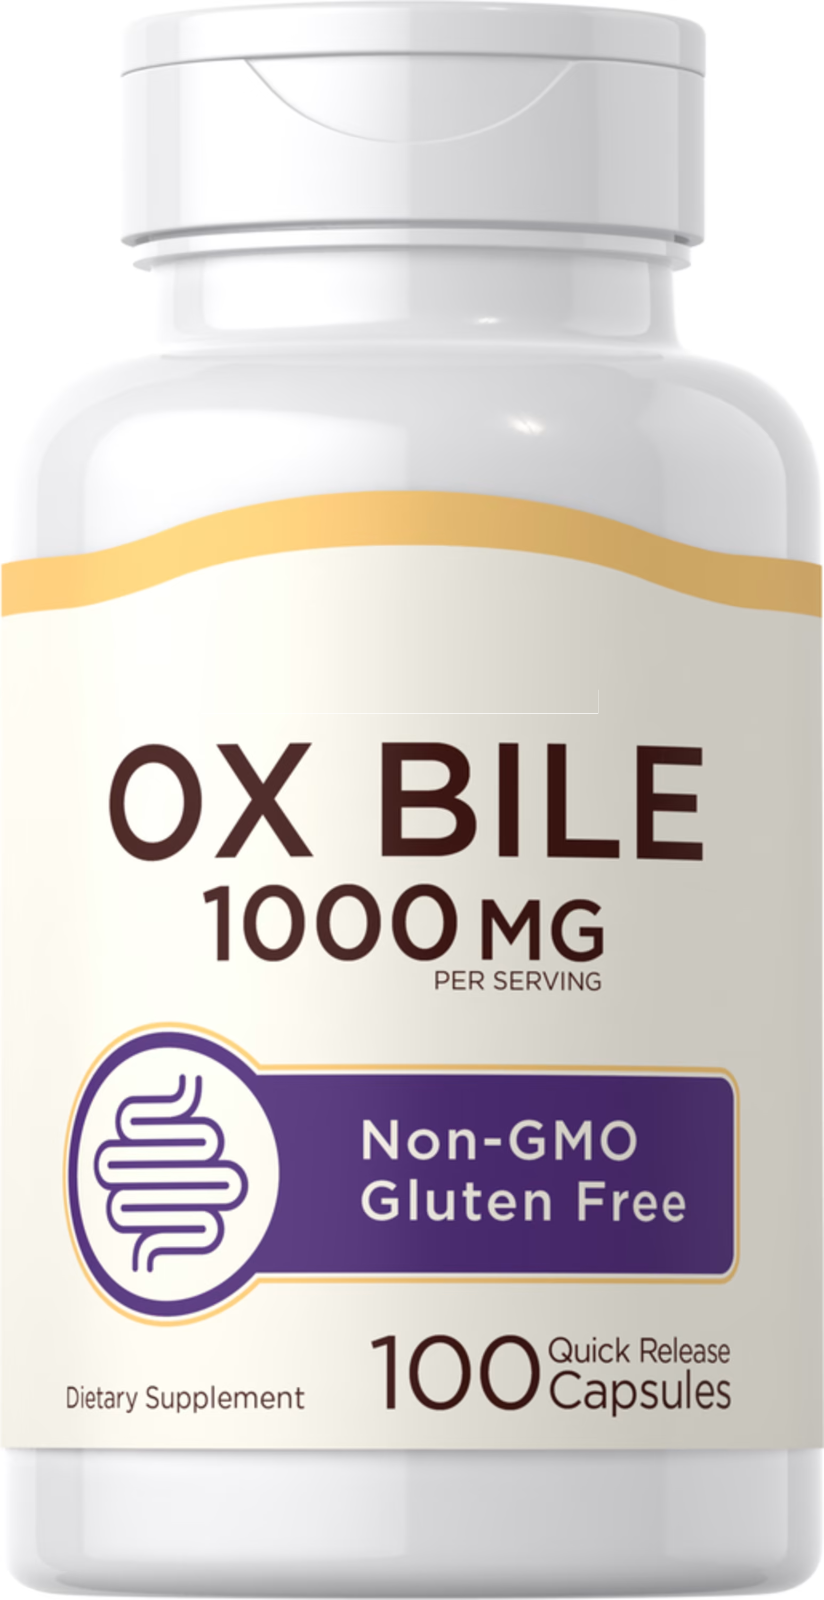 Ox Bile 1000mg 100 Caps Digestive Enzymes Non GMO/Gluten Free/No Preservatives